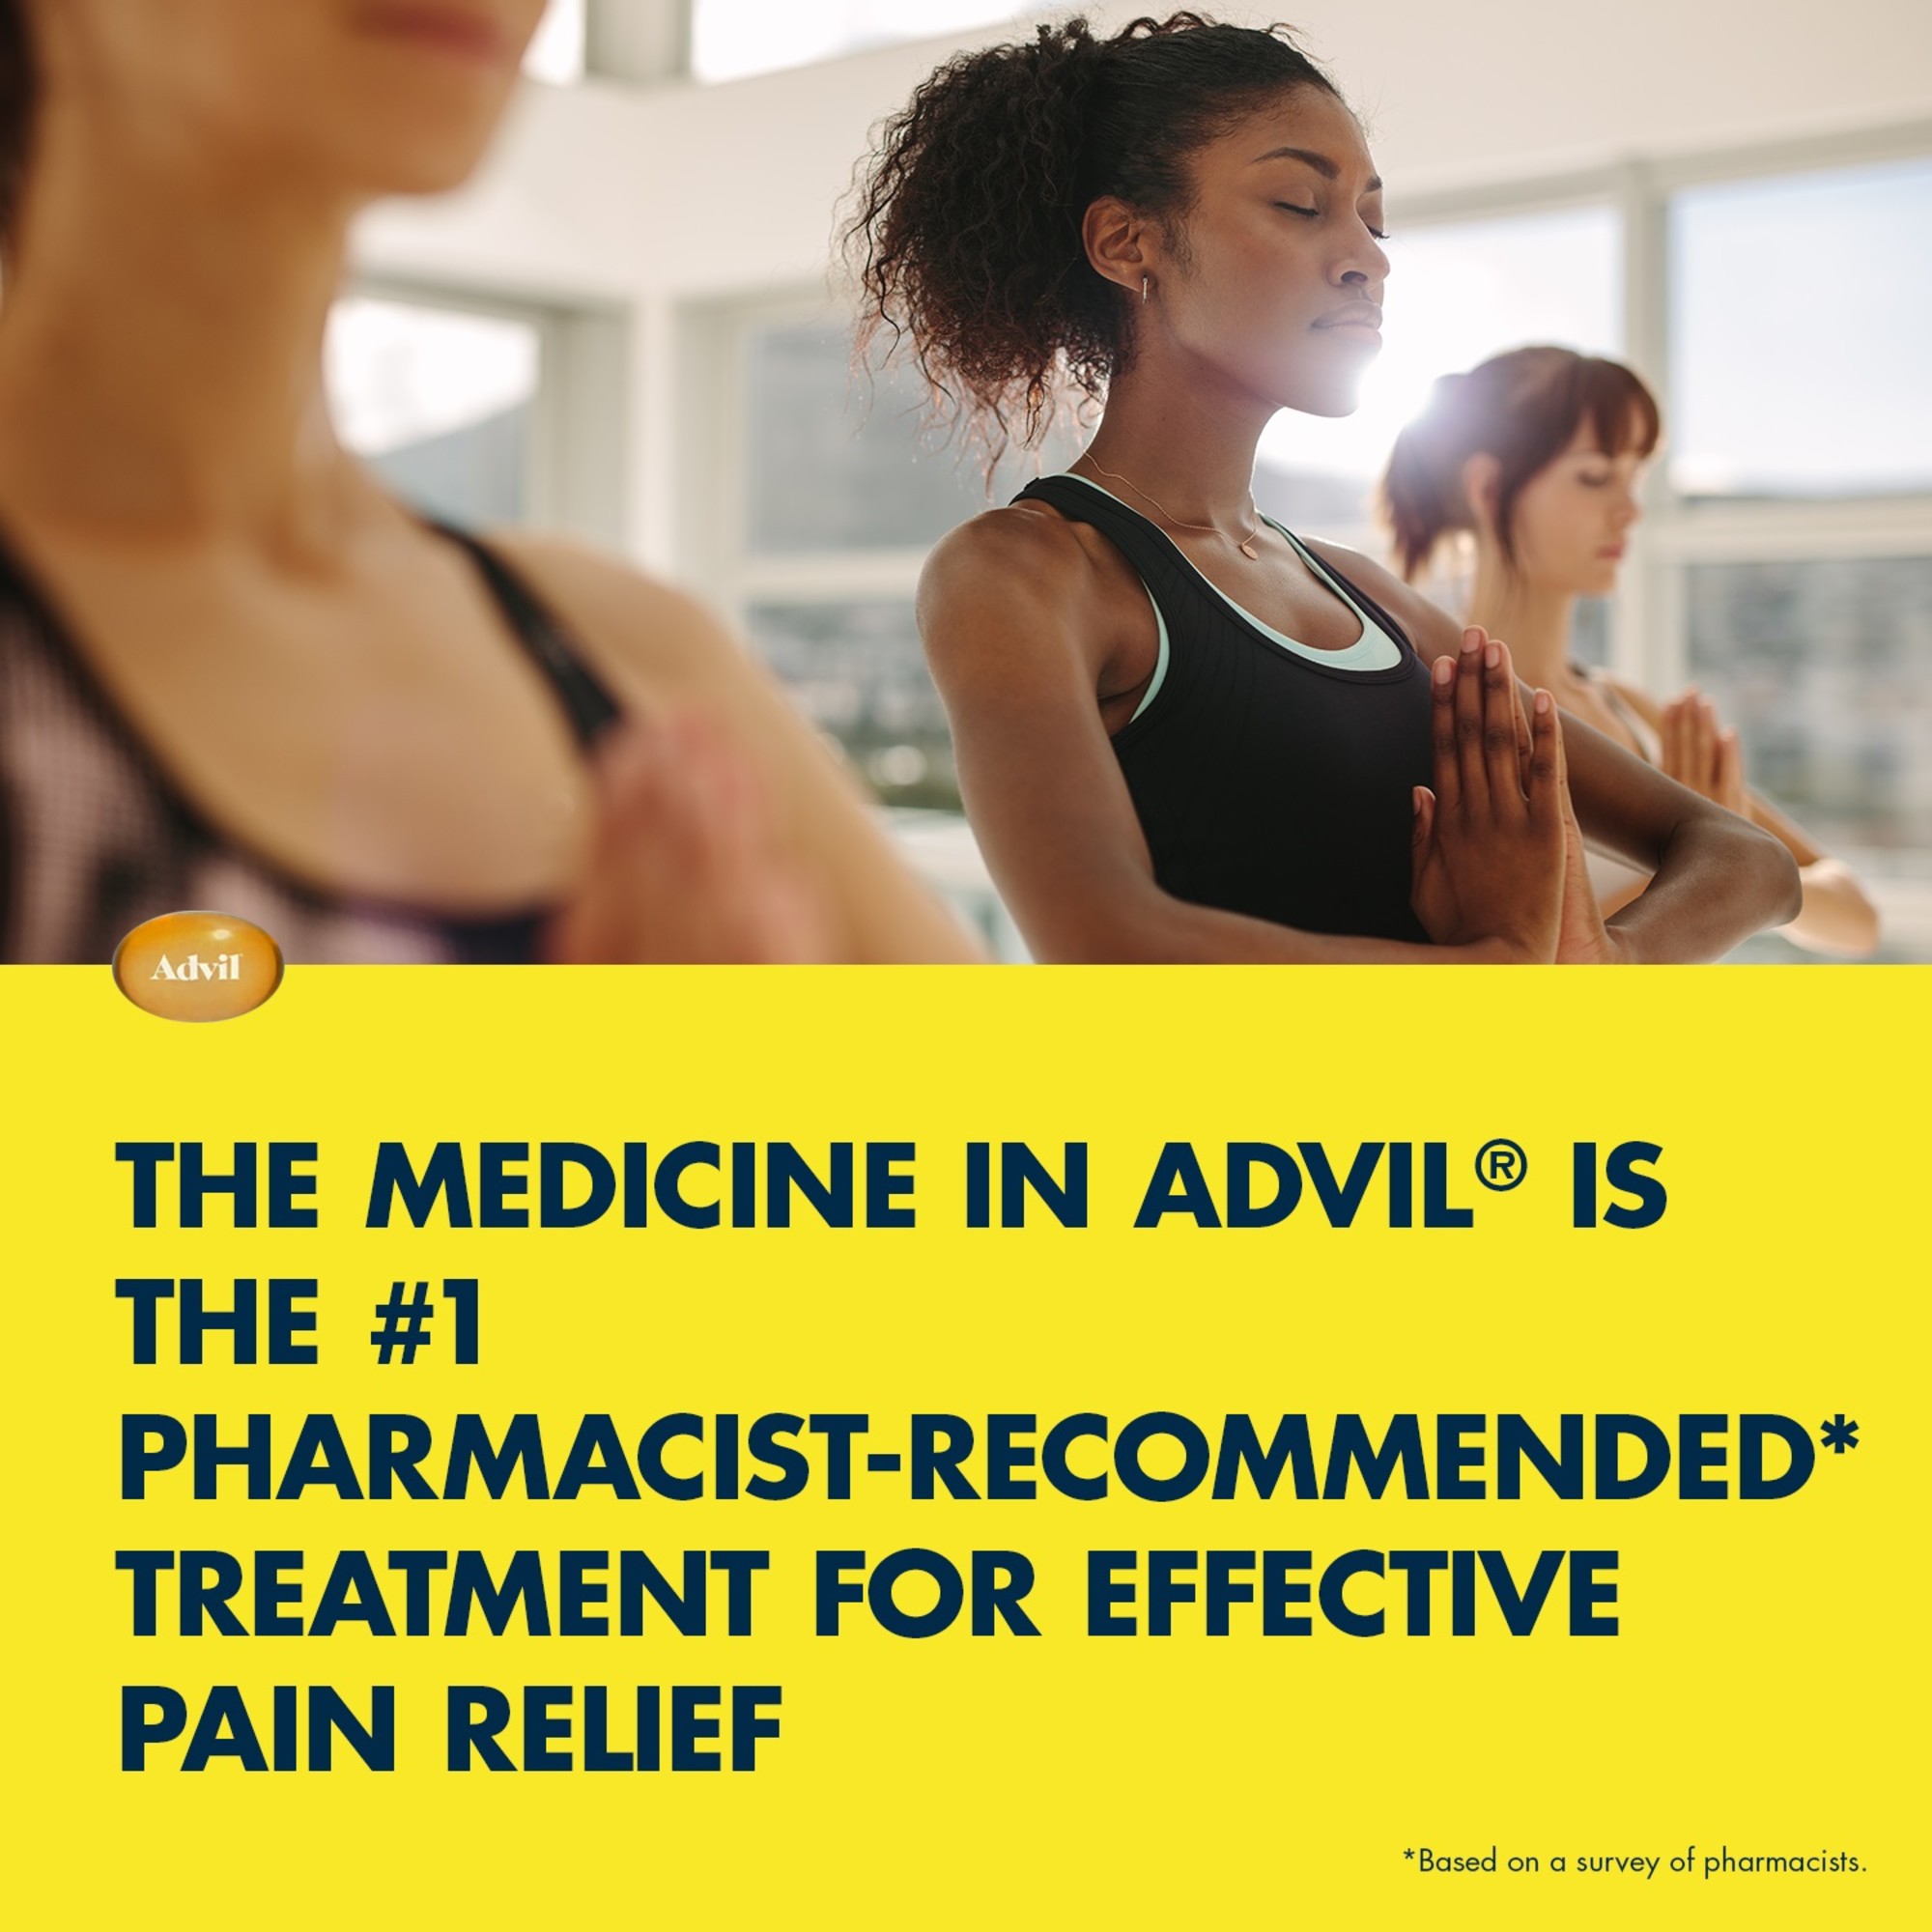 Advil Pain Relievers and Fever Reducer Liquid Filled Capsules, 200 Mg Ibuprofen, 80 Count - image 2 of 5